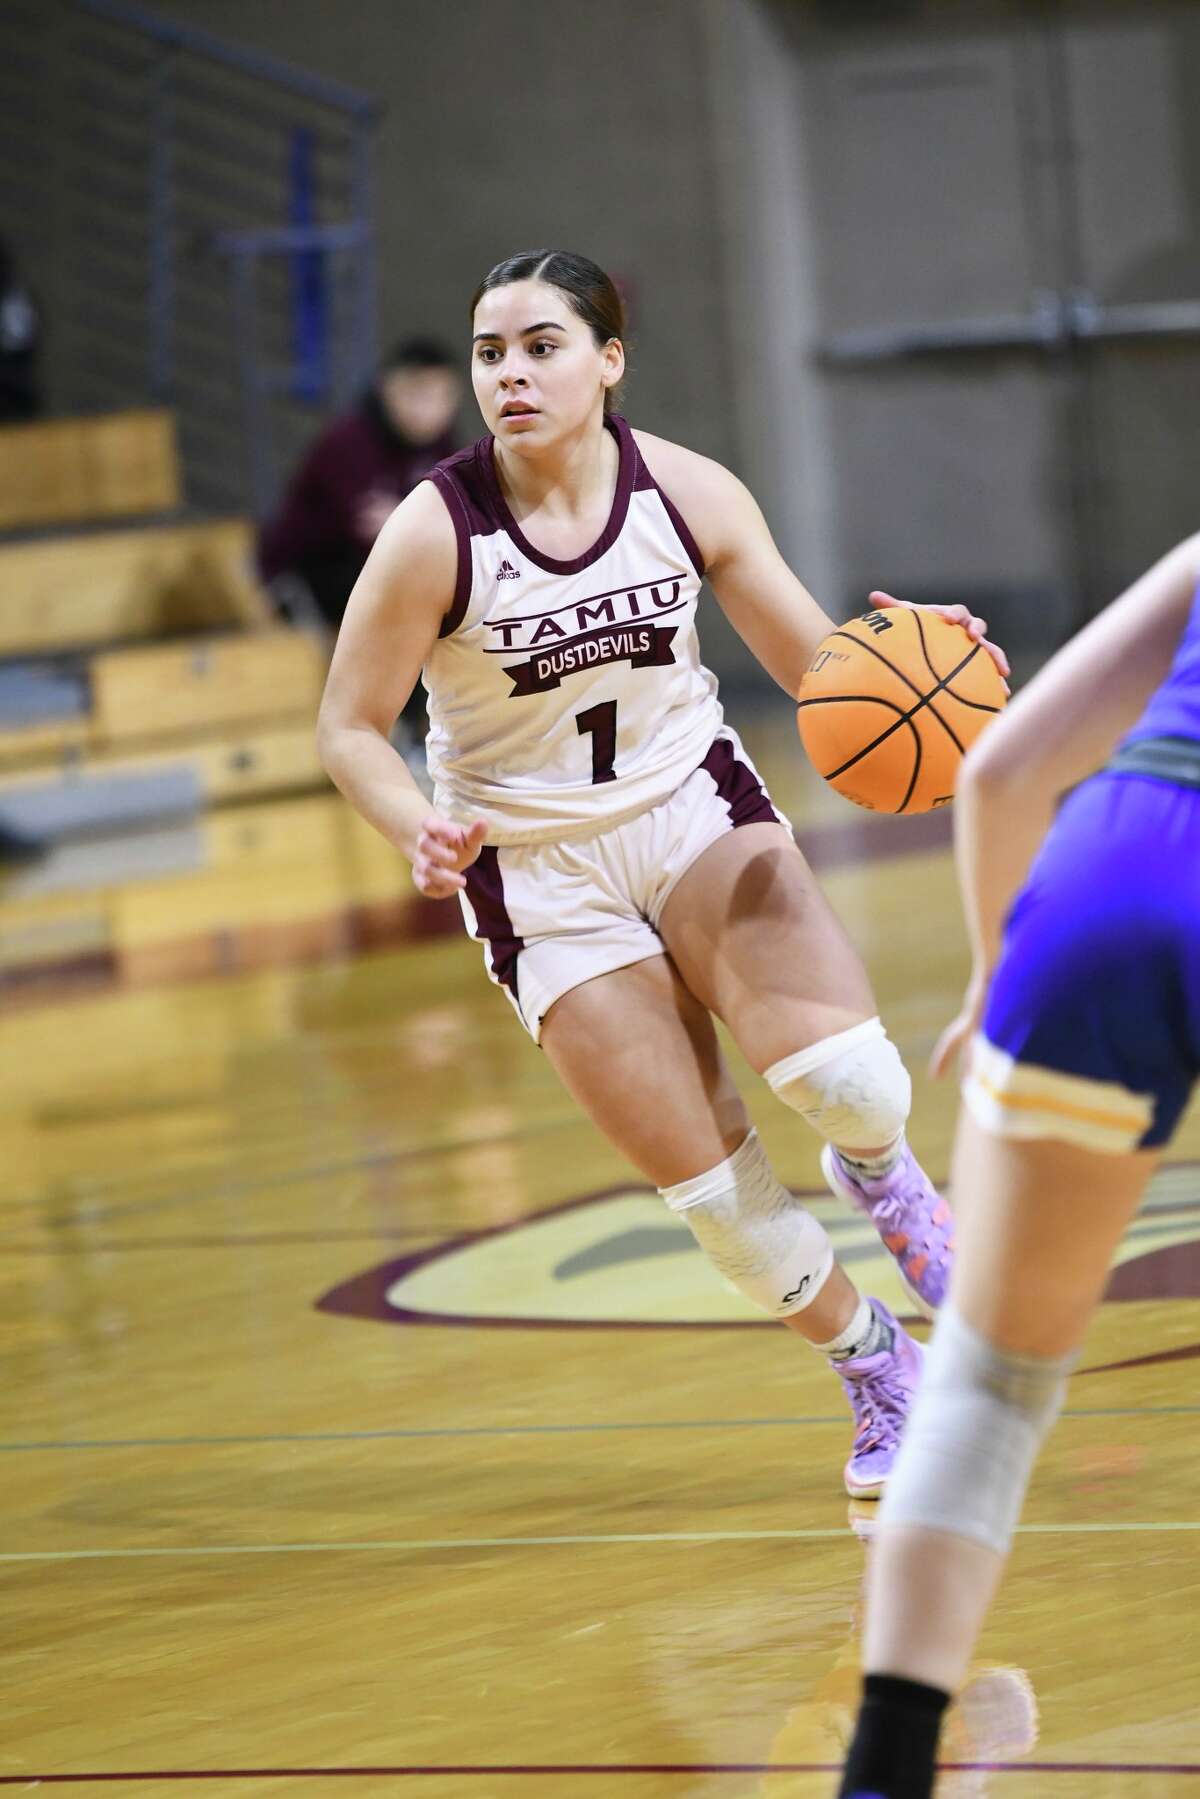 Evelyn Quiroz and the TAMIU Dustdevils are set to open the season with two road games this weekend.